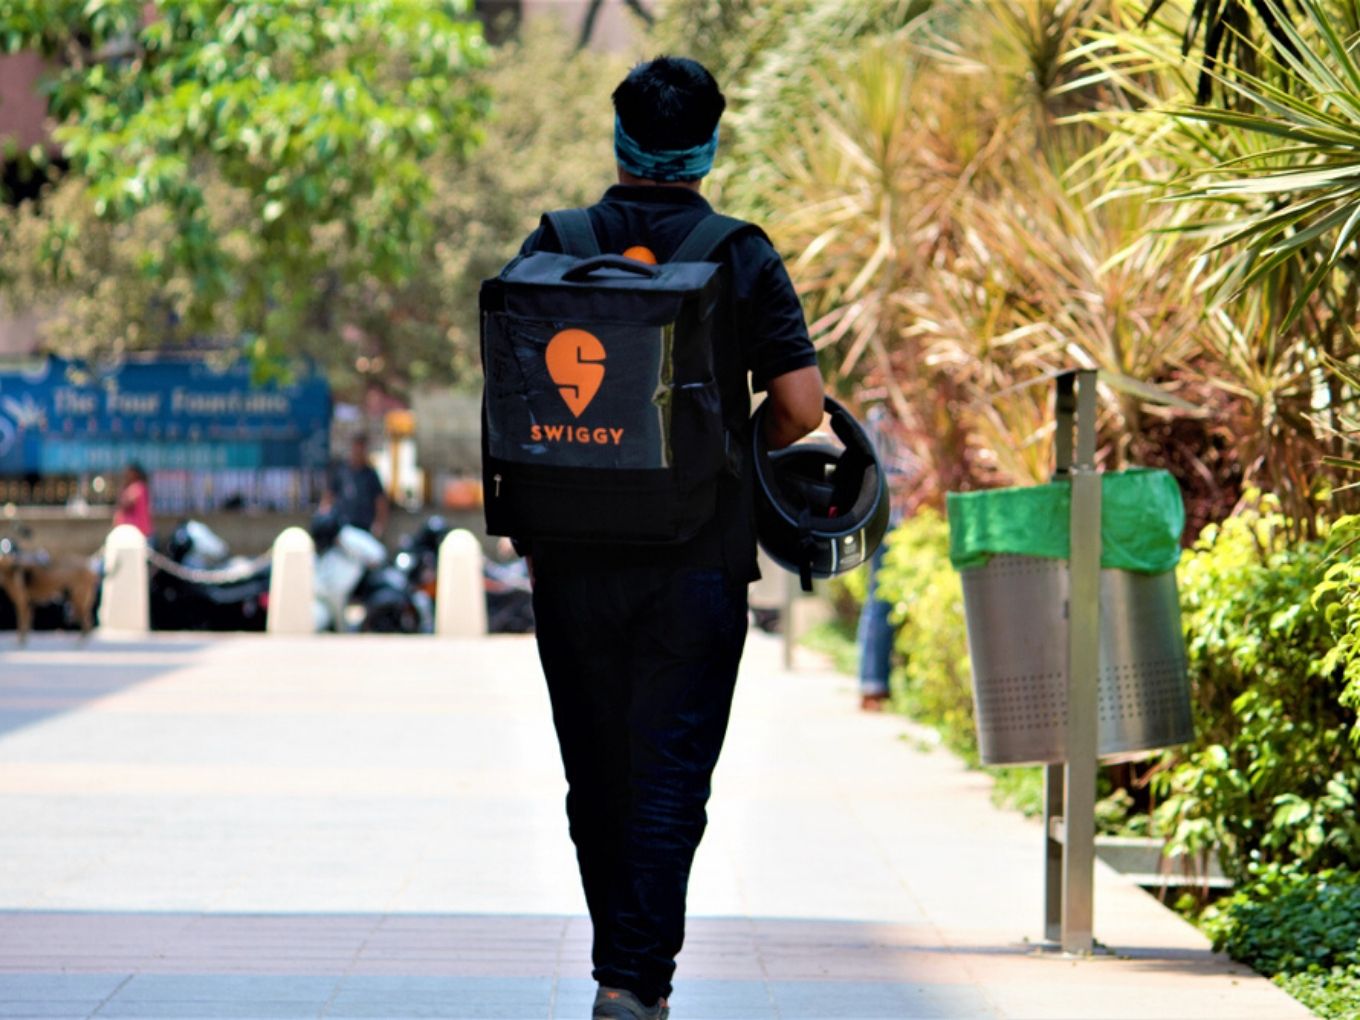 Delivery Executives Accuse Swiggy Of Rigging The System